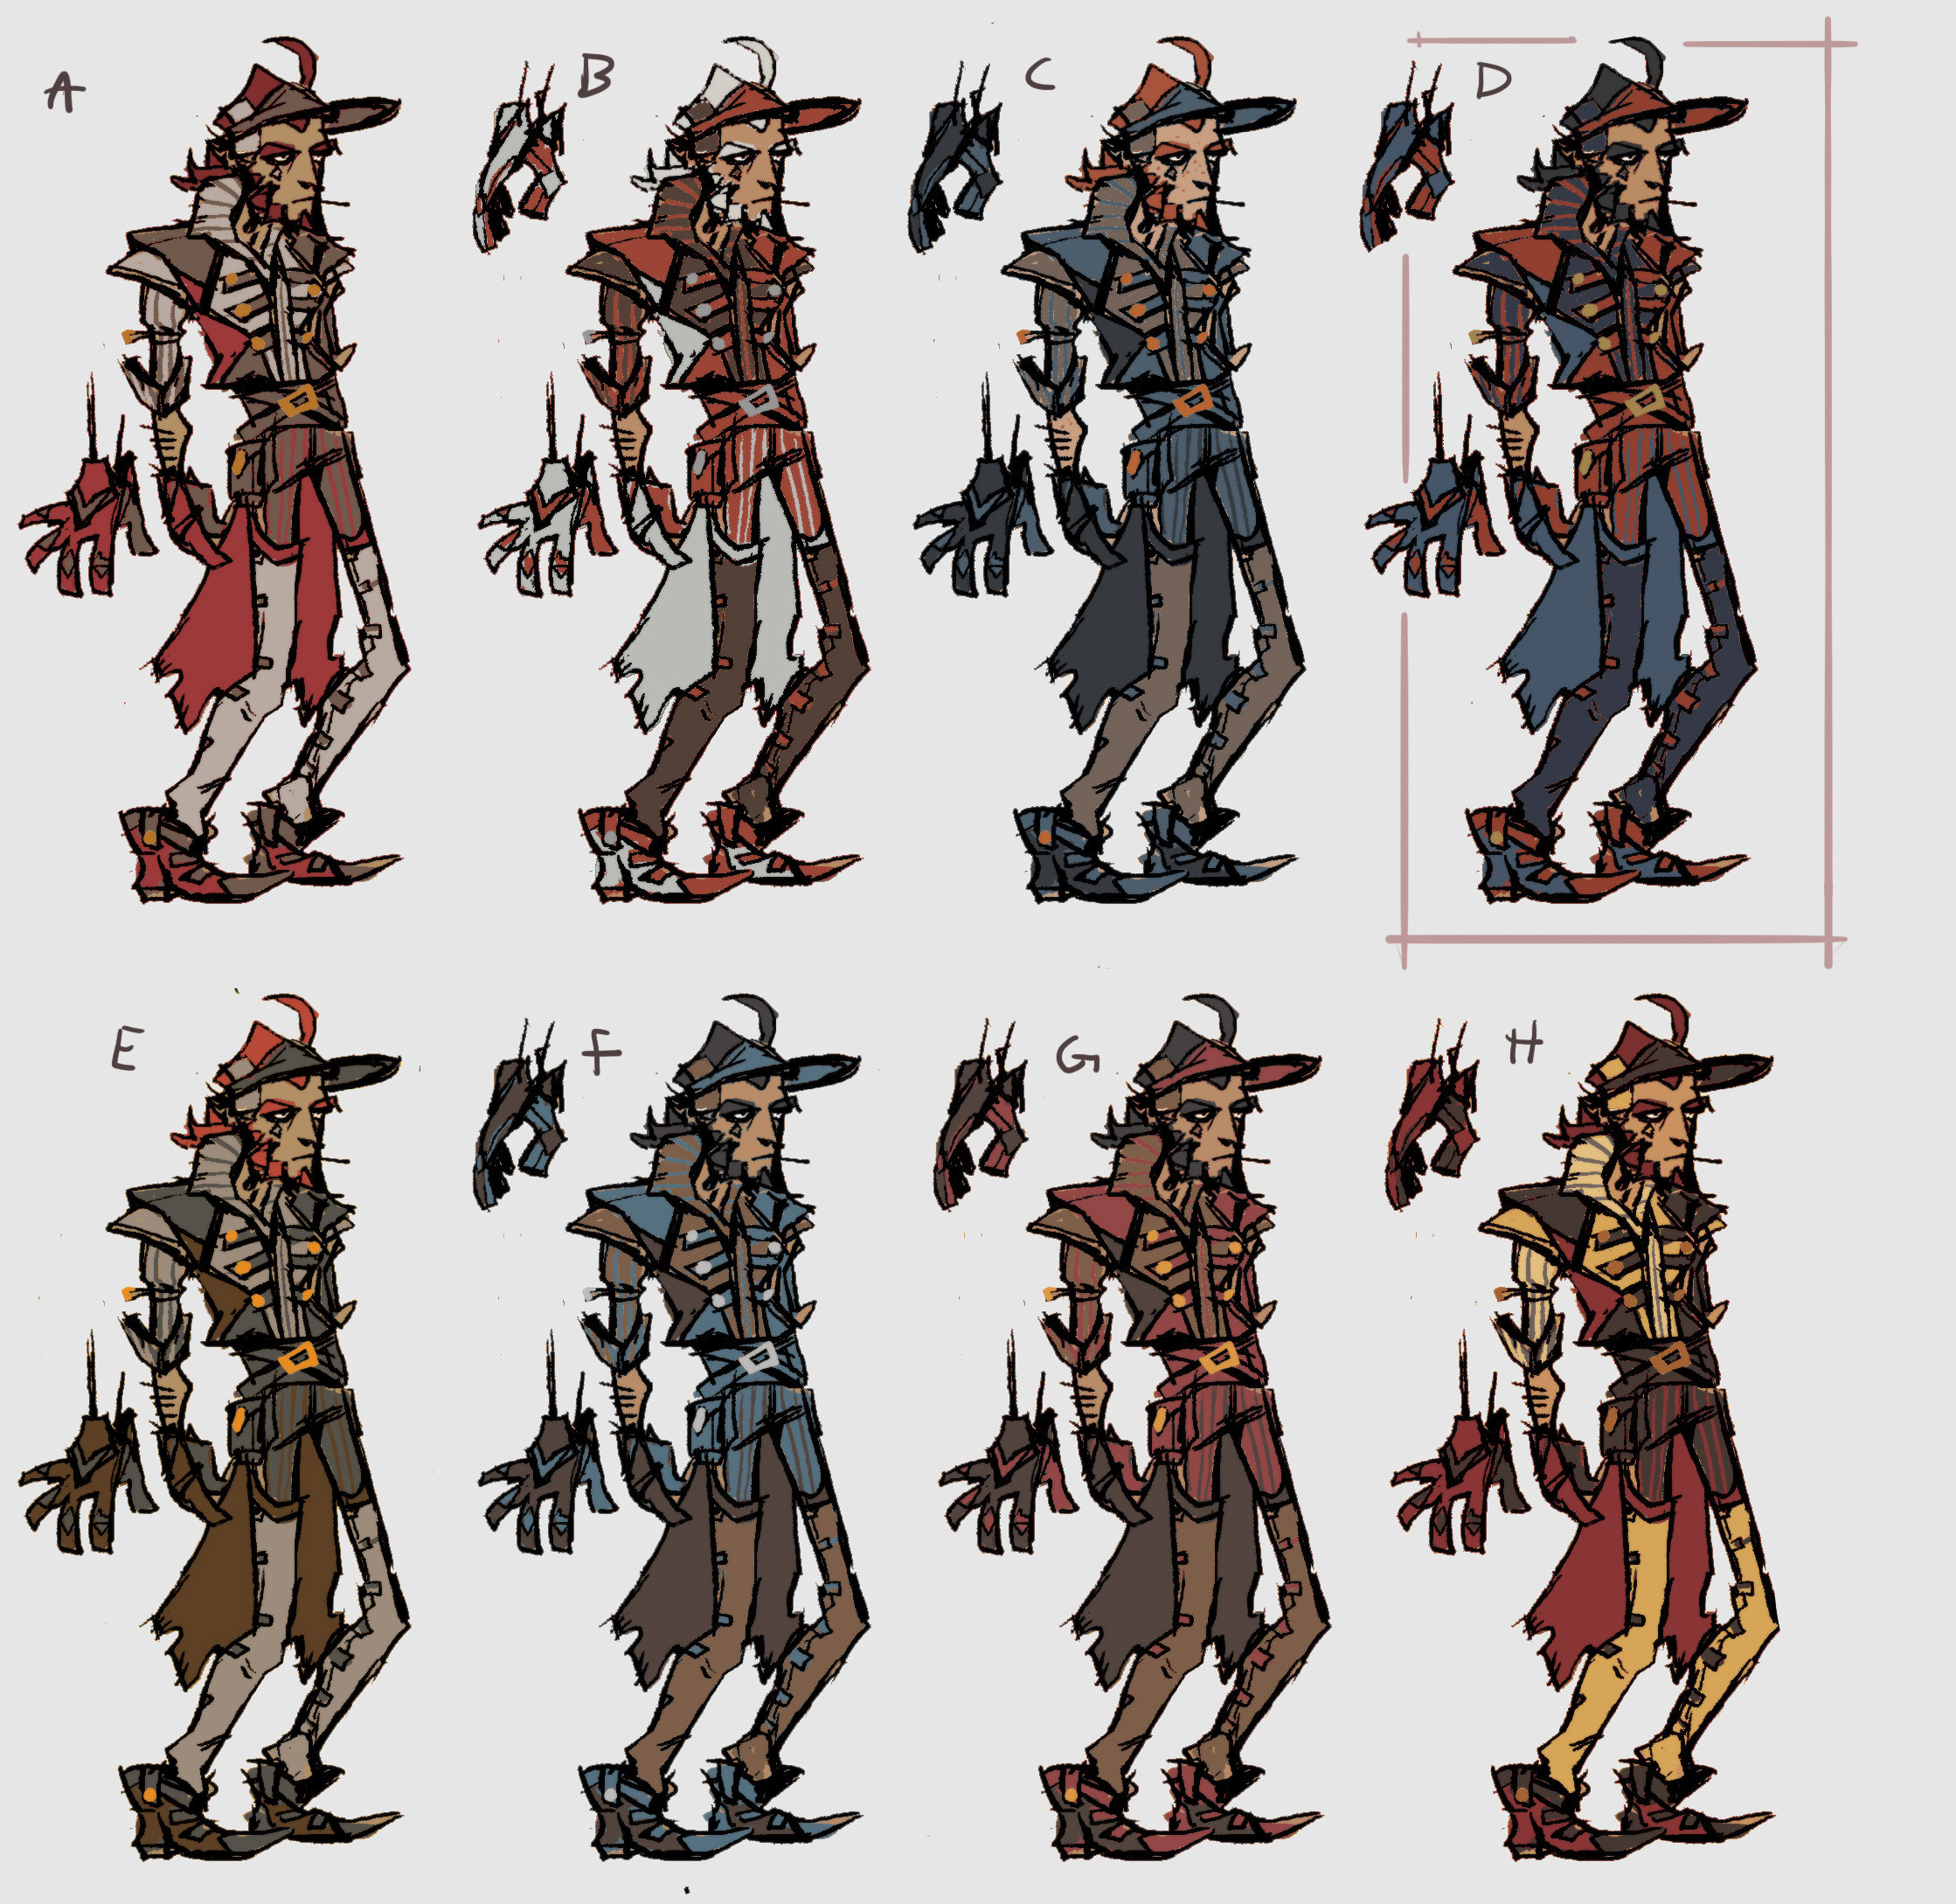 Some concepts for his color scheme - i had both playing cards and the wild west in mind when making these. 